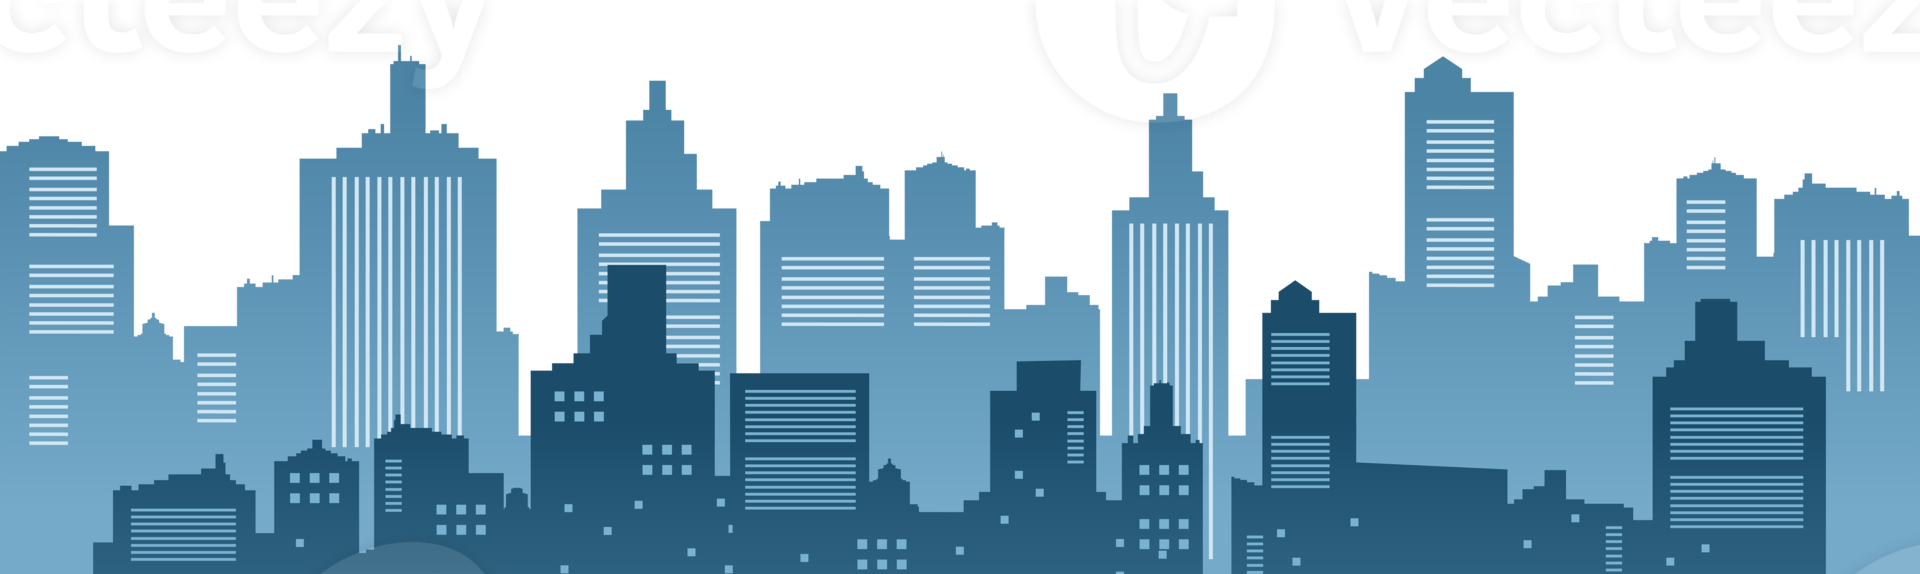 Blue Silhouette Cityscape PNG. png